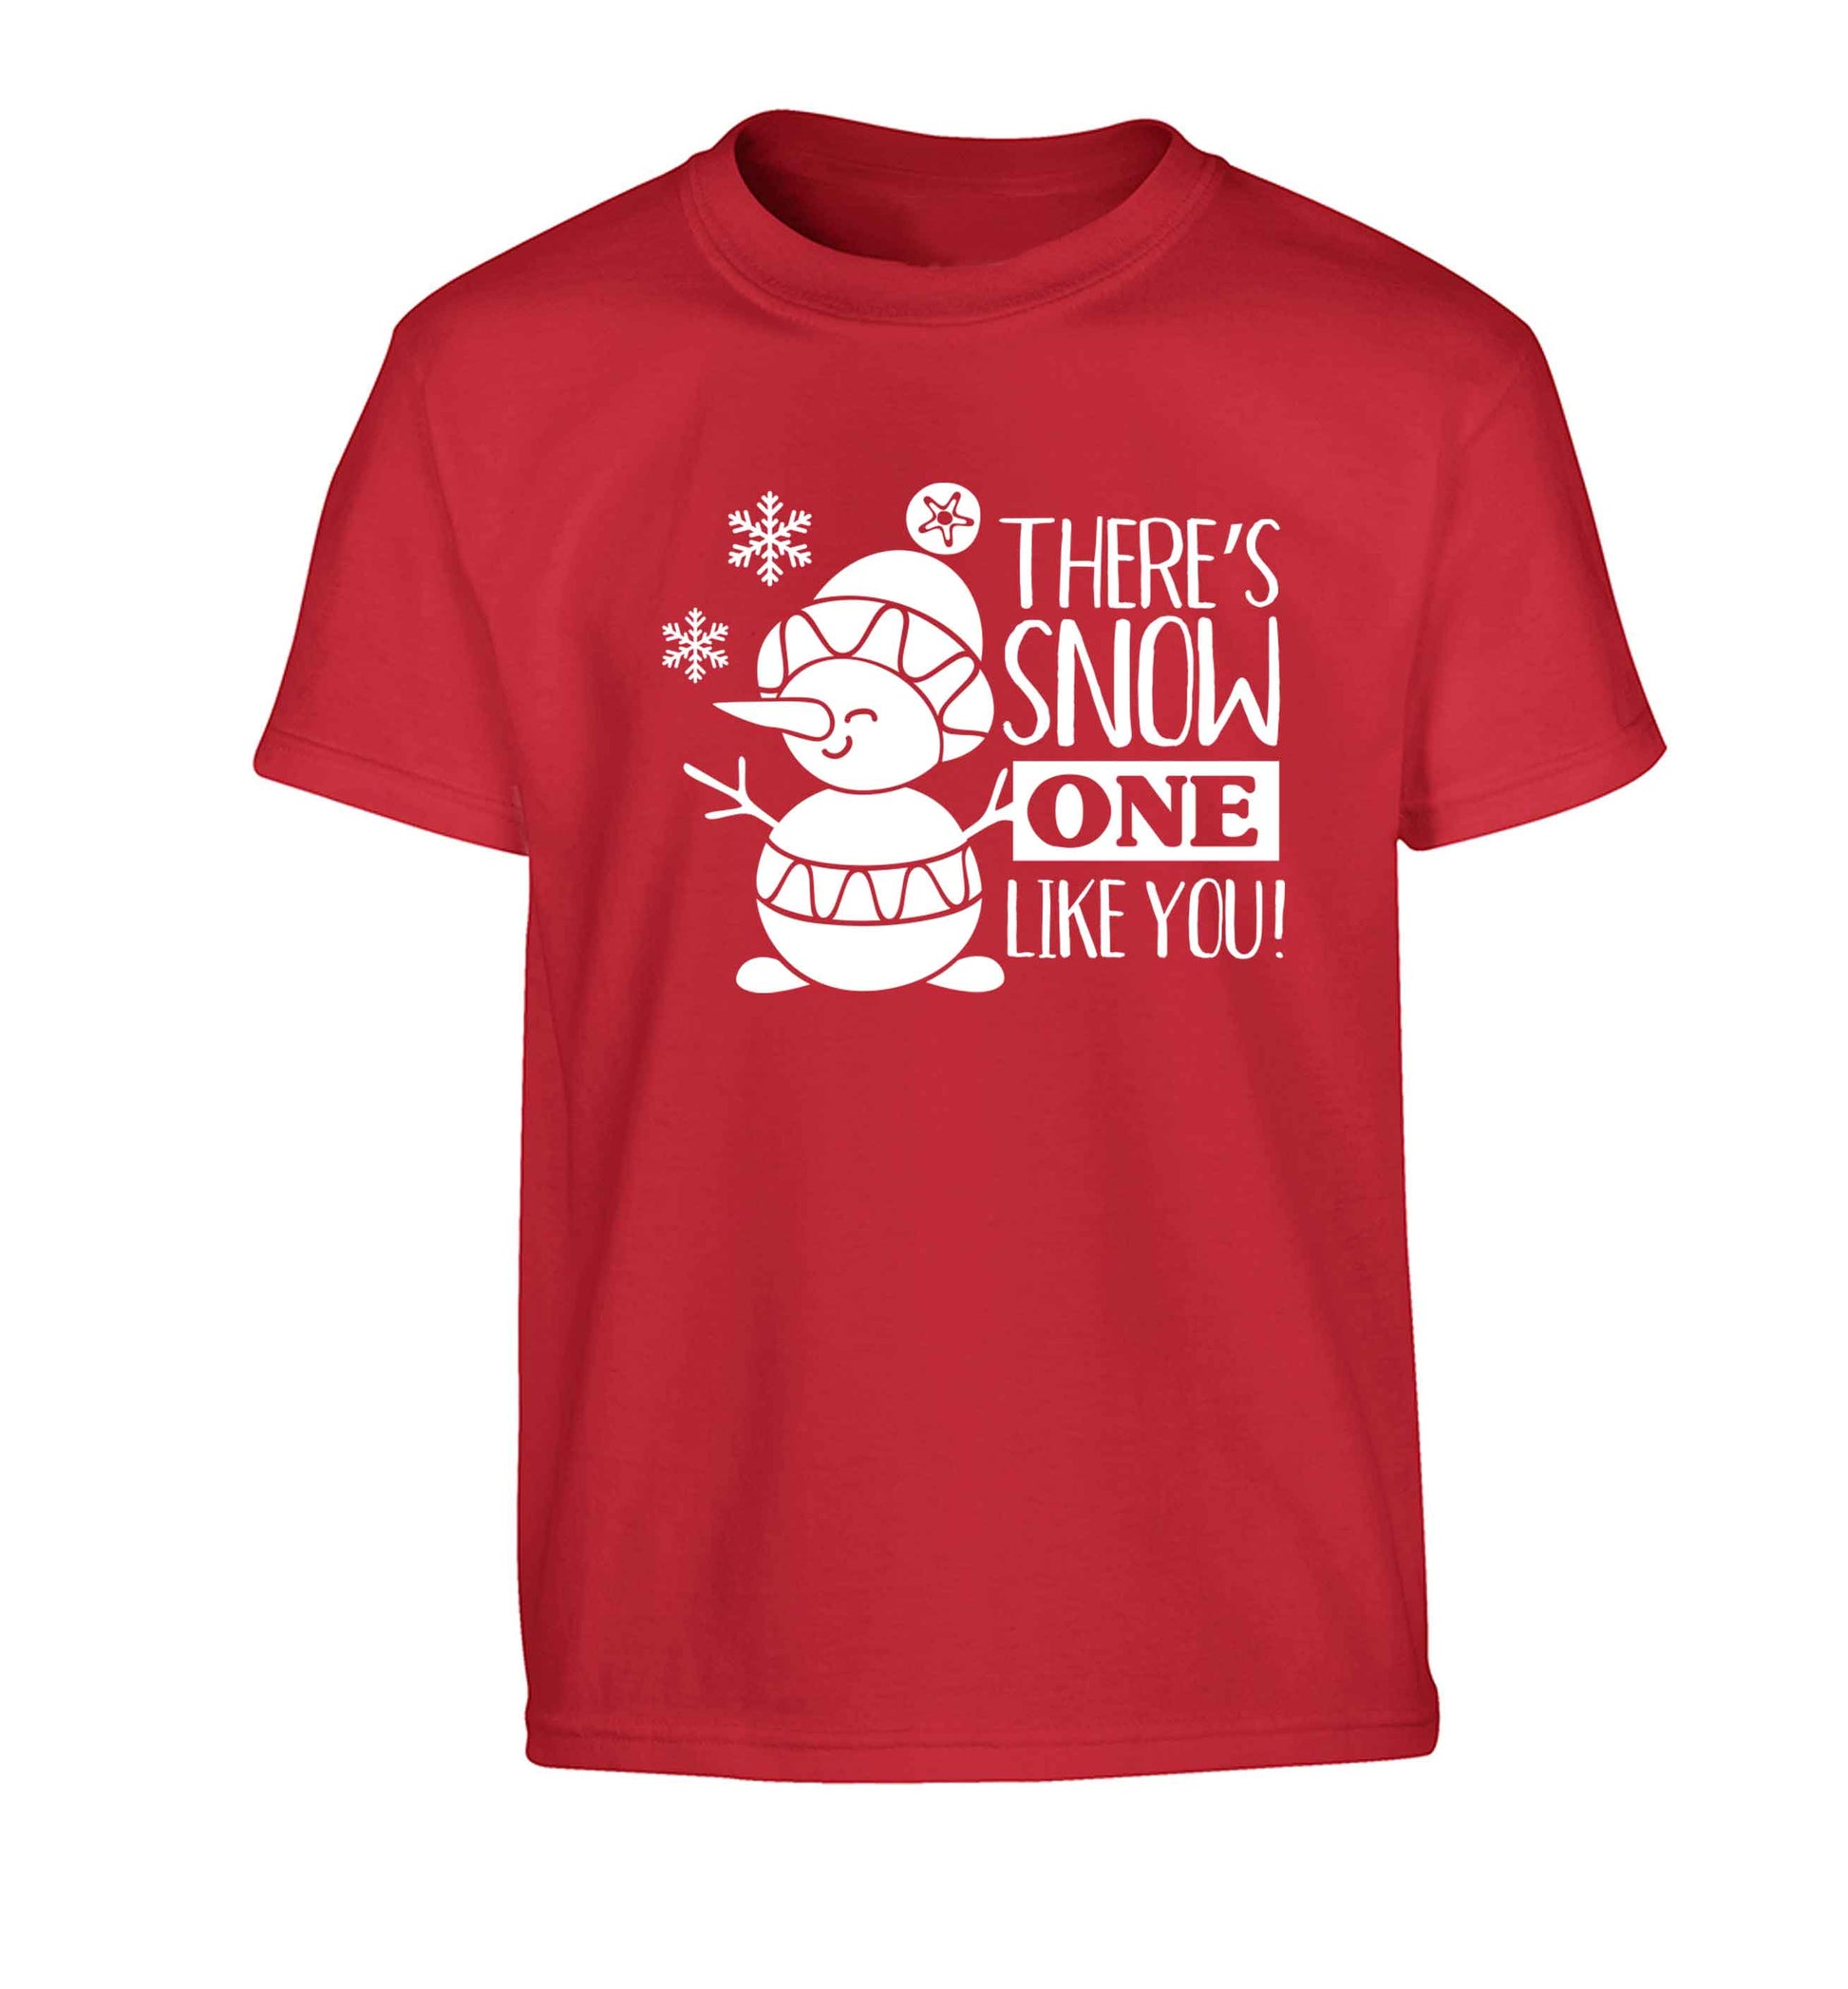 There's snow one like you Children's red Tshirt 12-13 Years